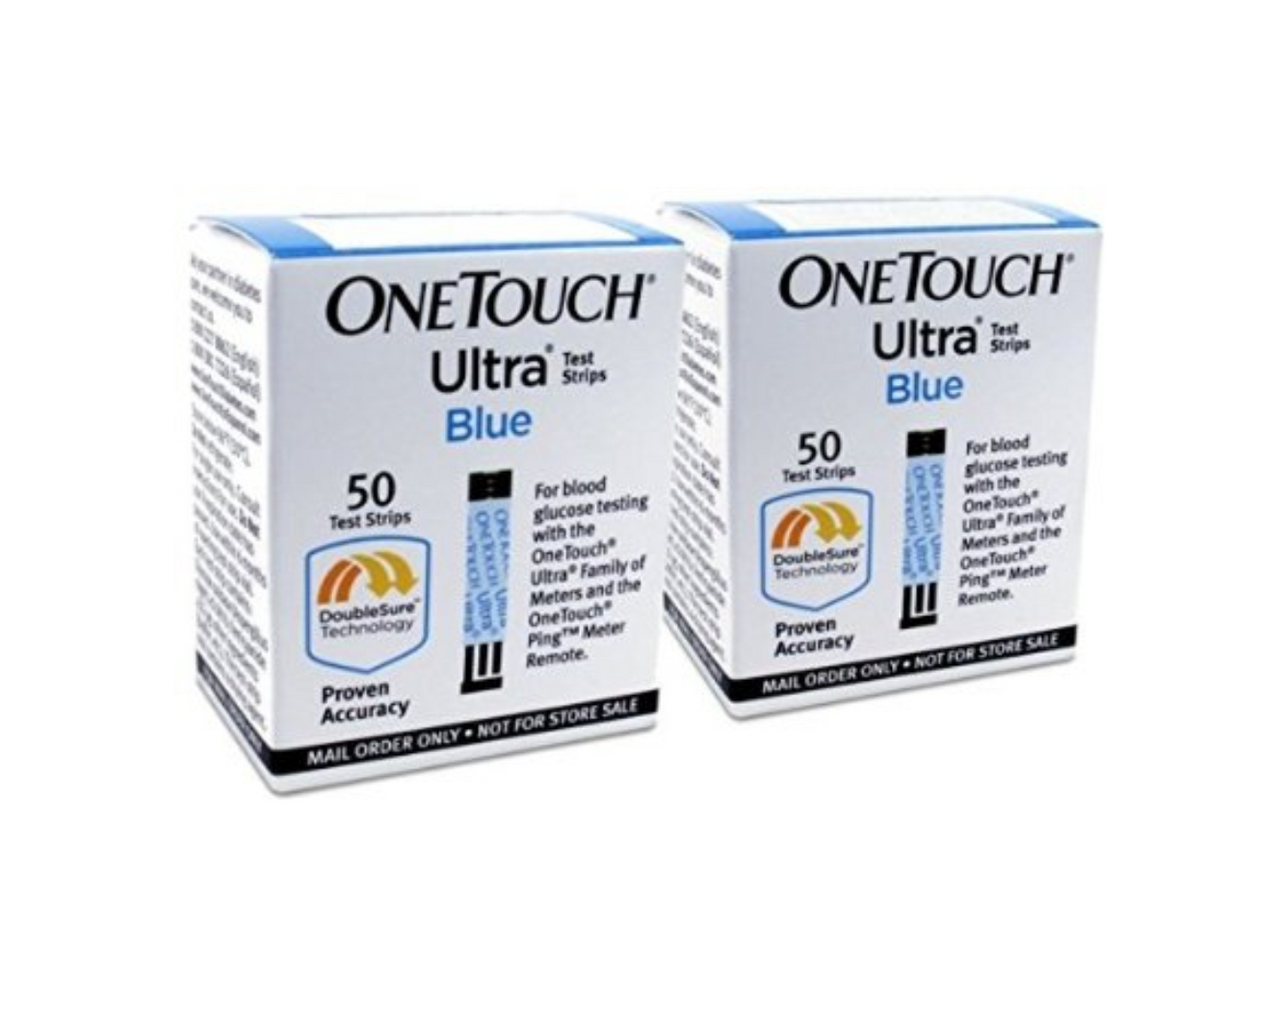 OneTouch Ultra Test Strips